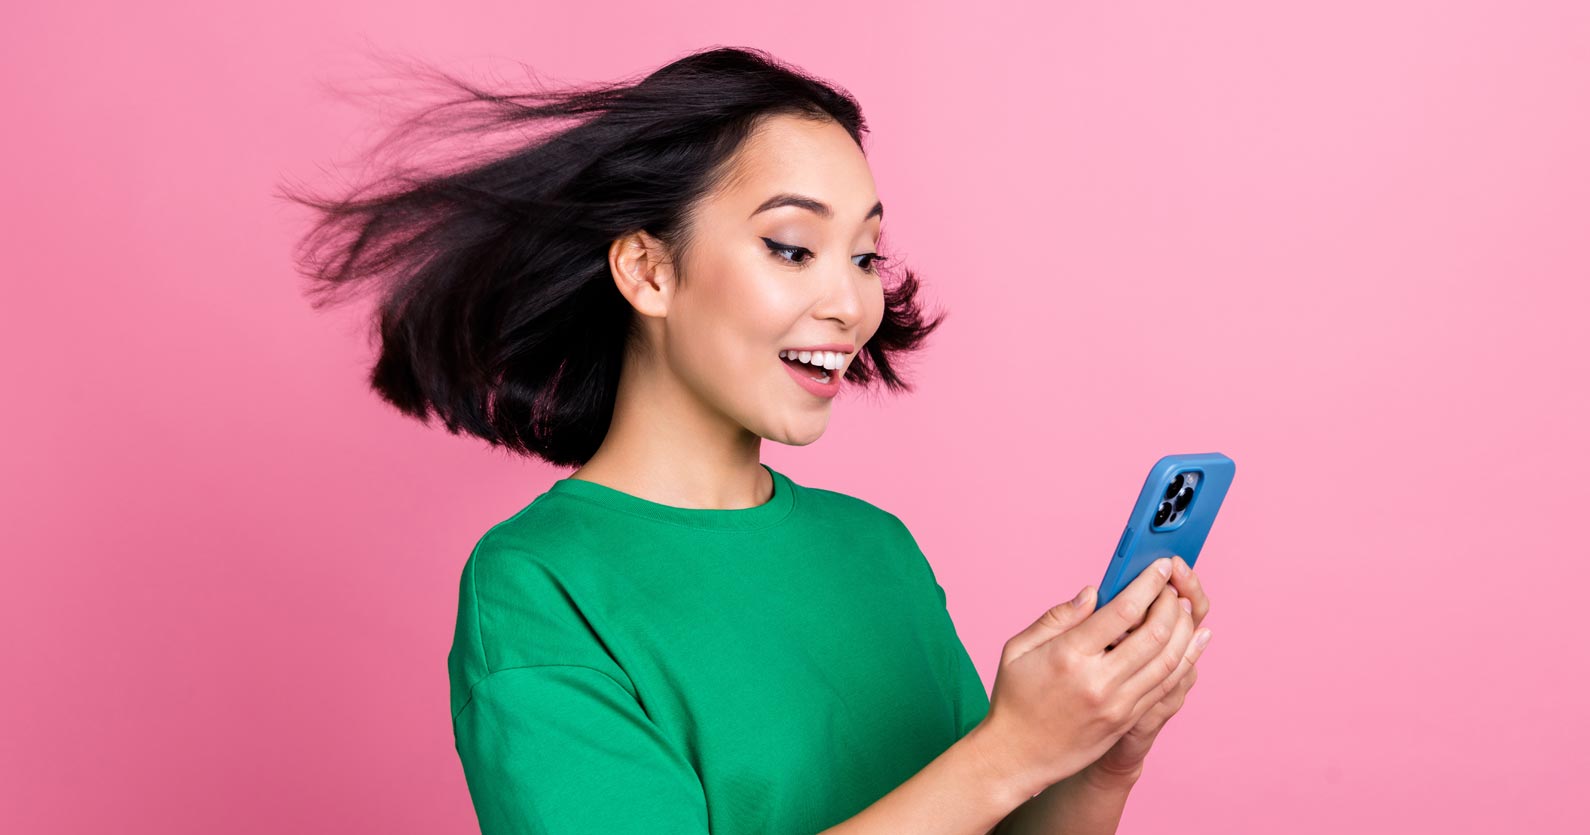 image of woman viewing her phone screen with hair blowing back